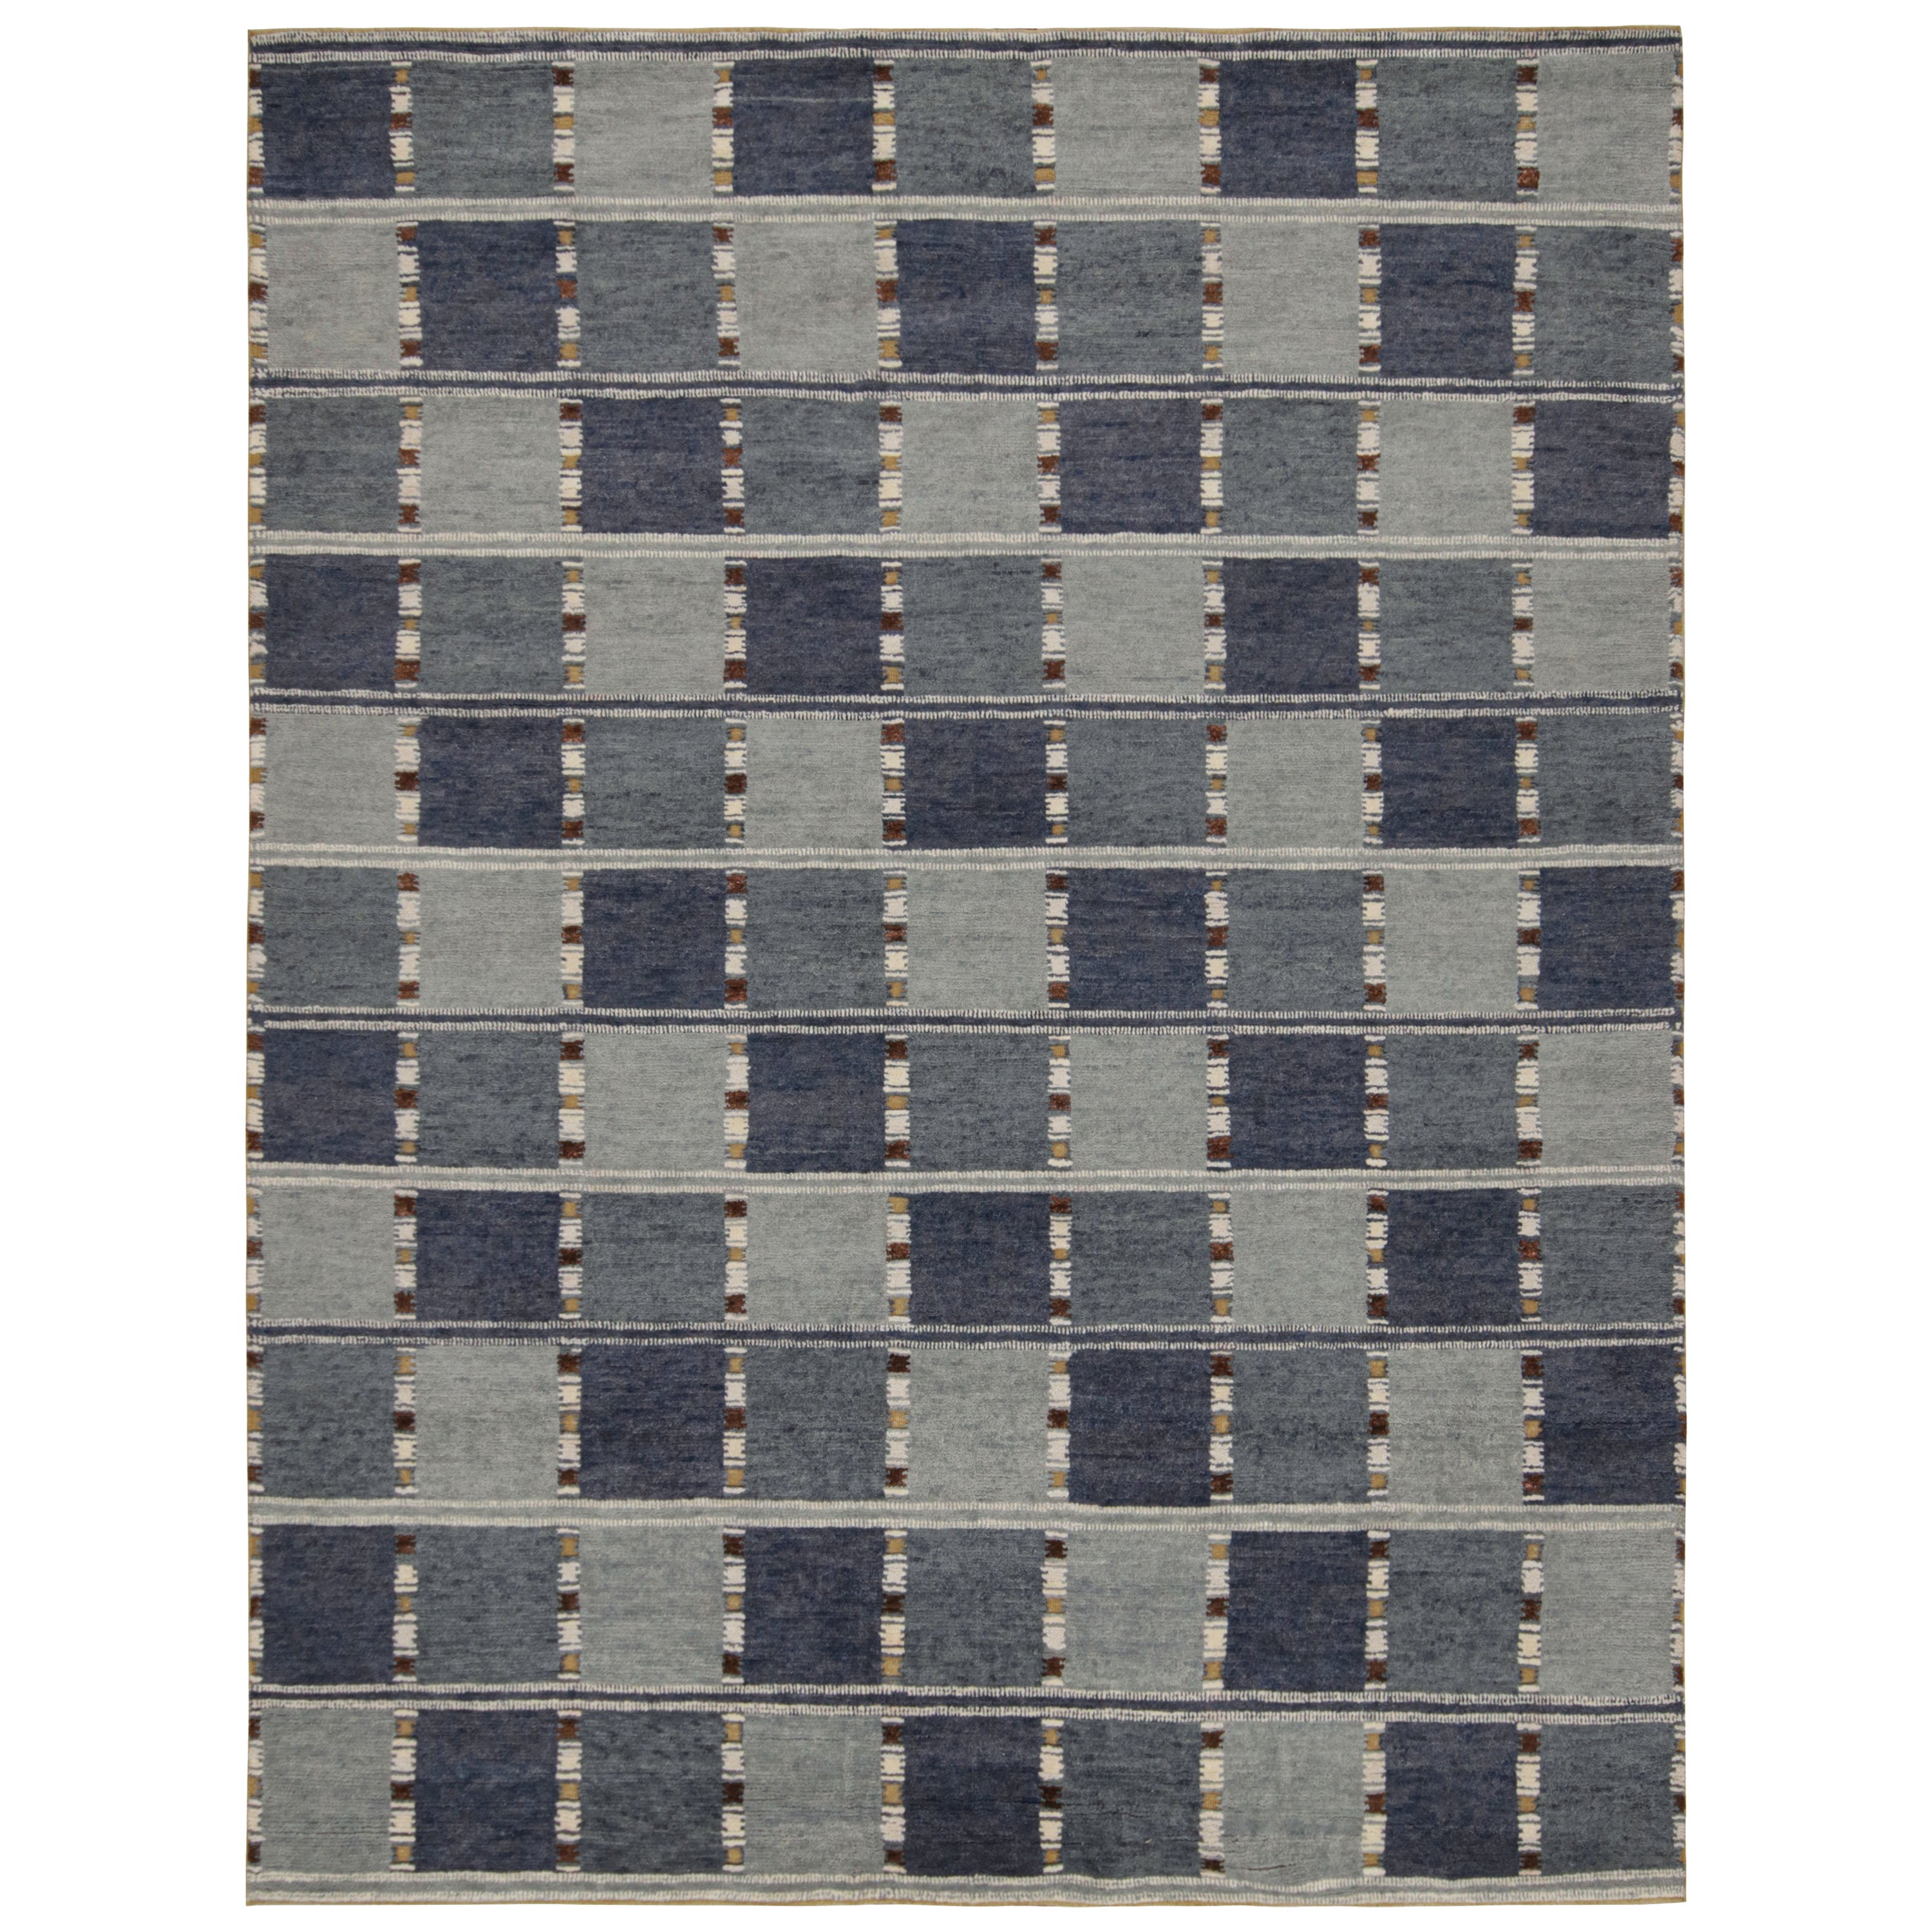 Rug & Kilim’s “High” Scandinavian Style Rug with Blue Geometric Patterns For Sale